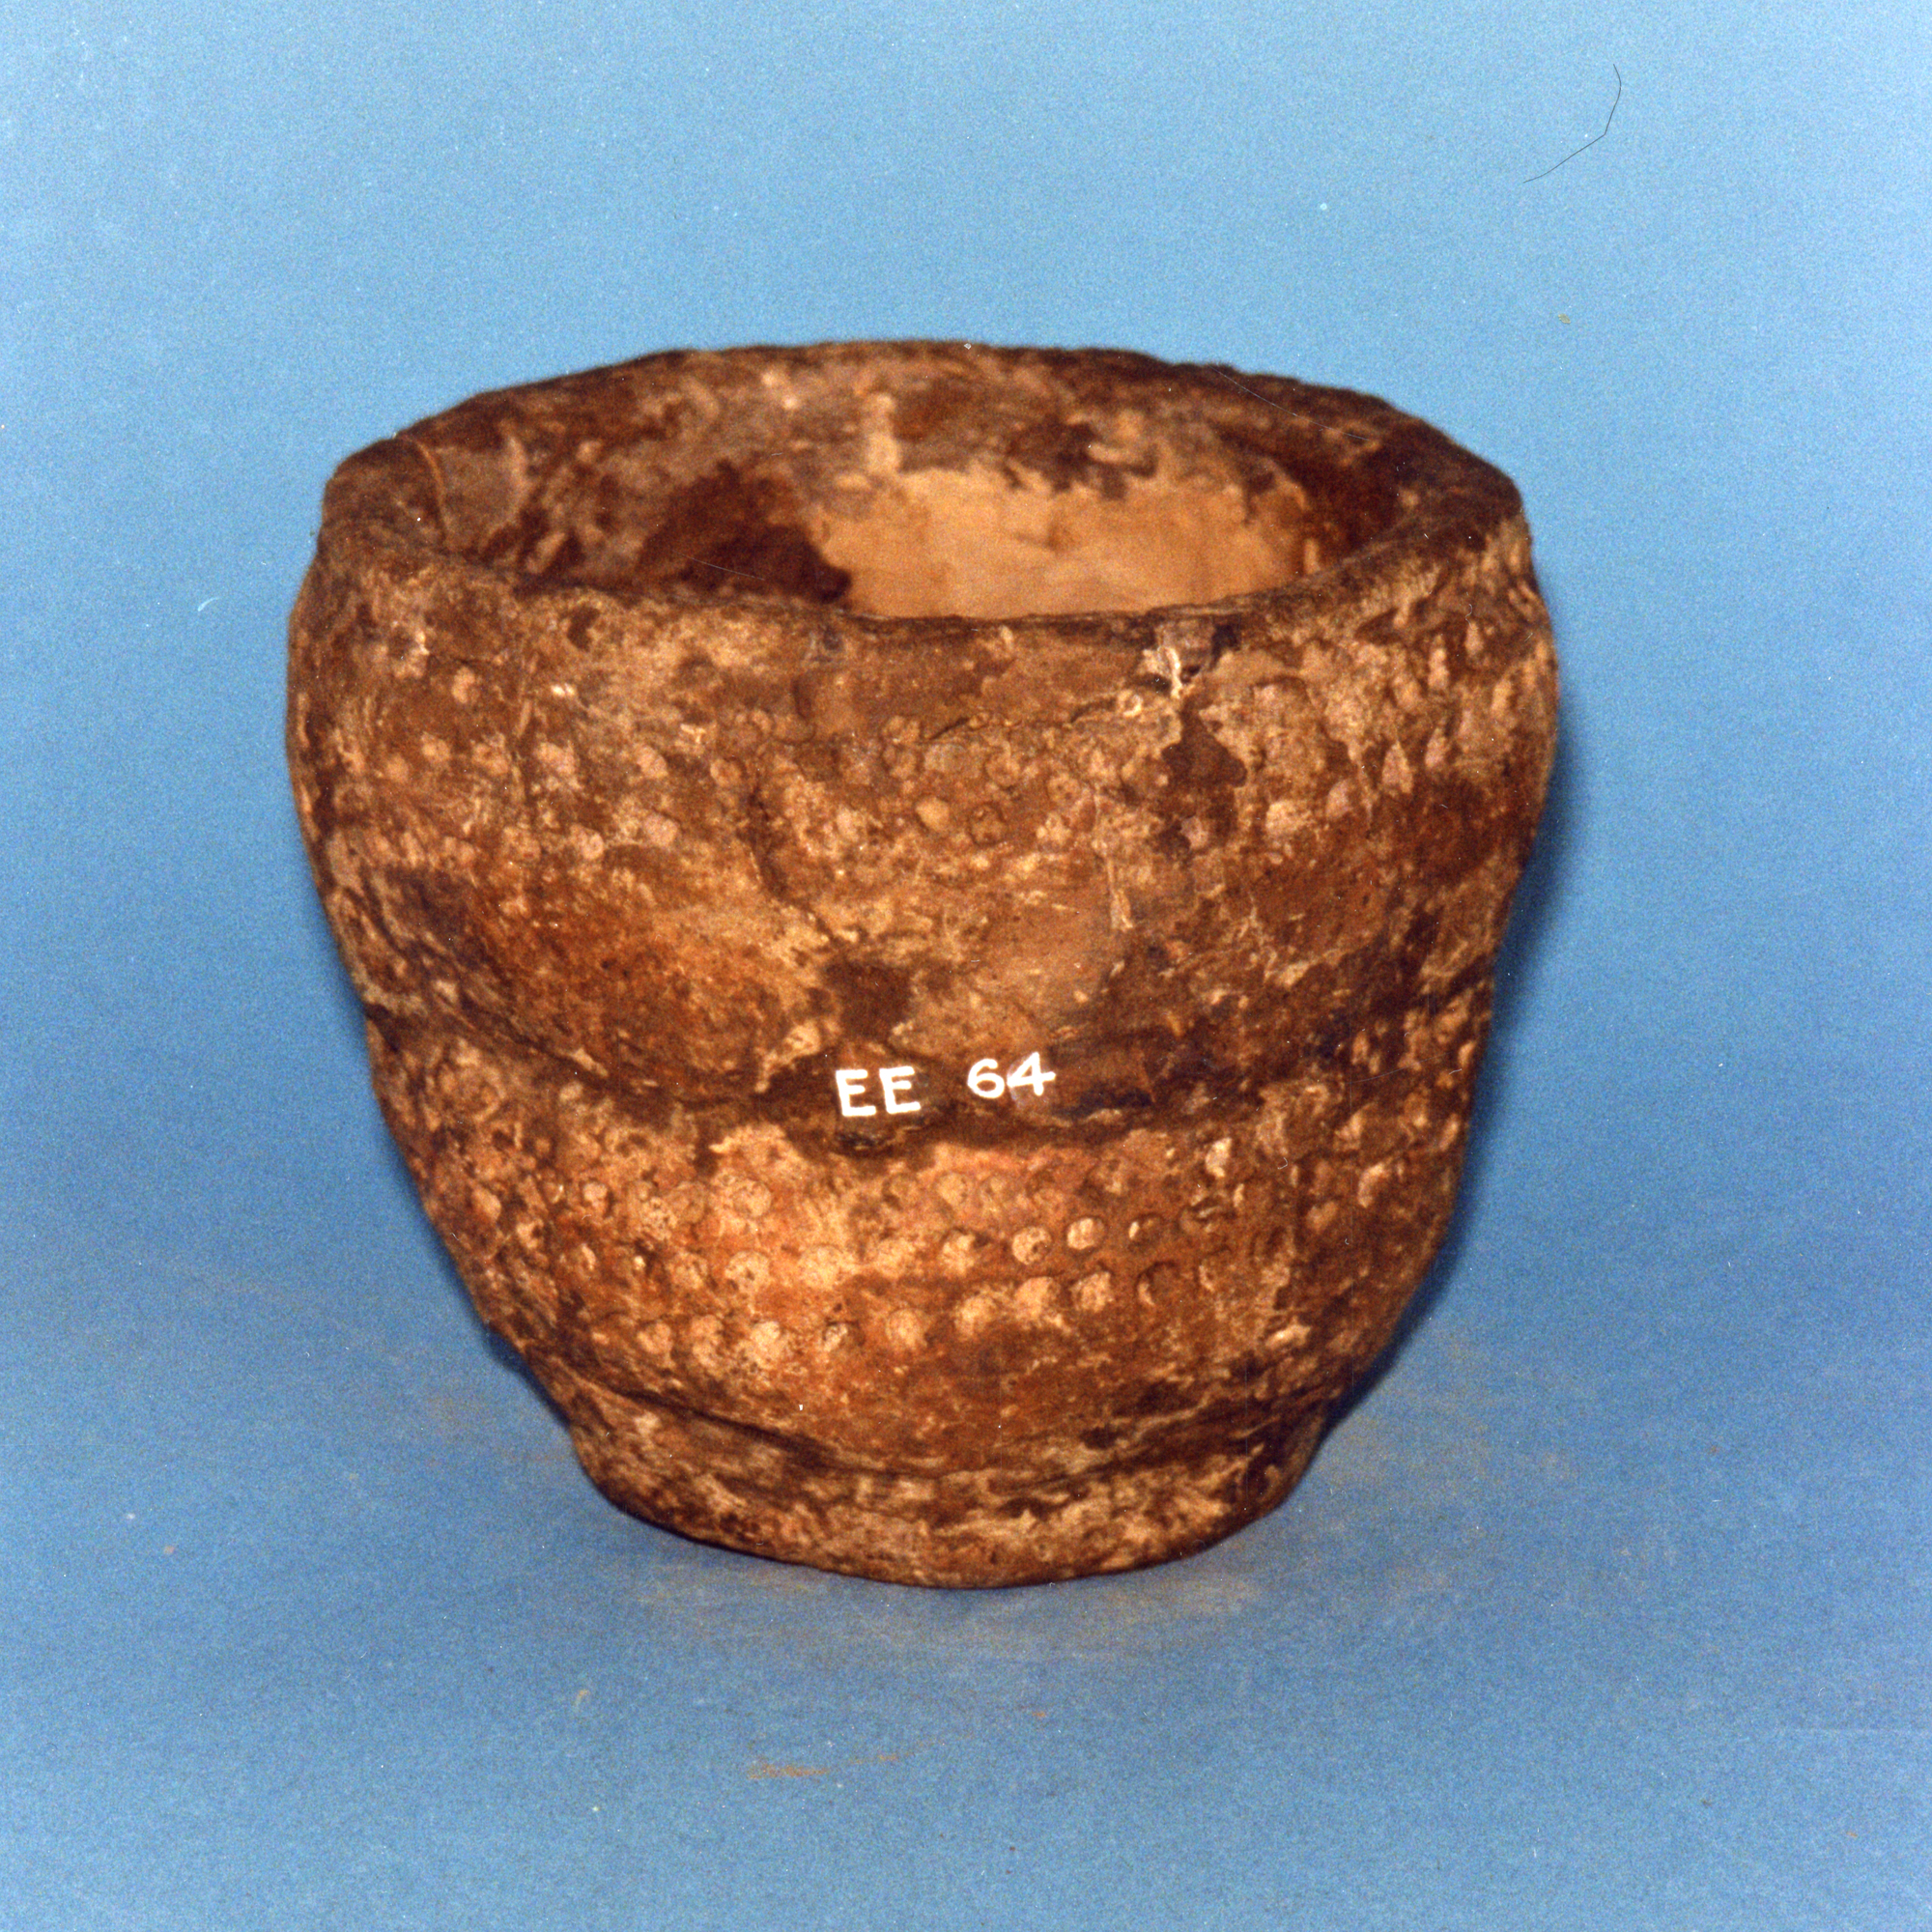 Image of Pottery food vessel from Hatton Cairn, Inverarity © National Museums Scotland